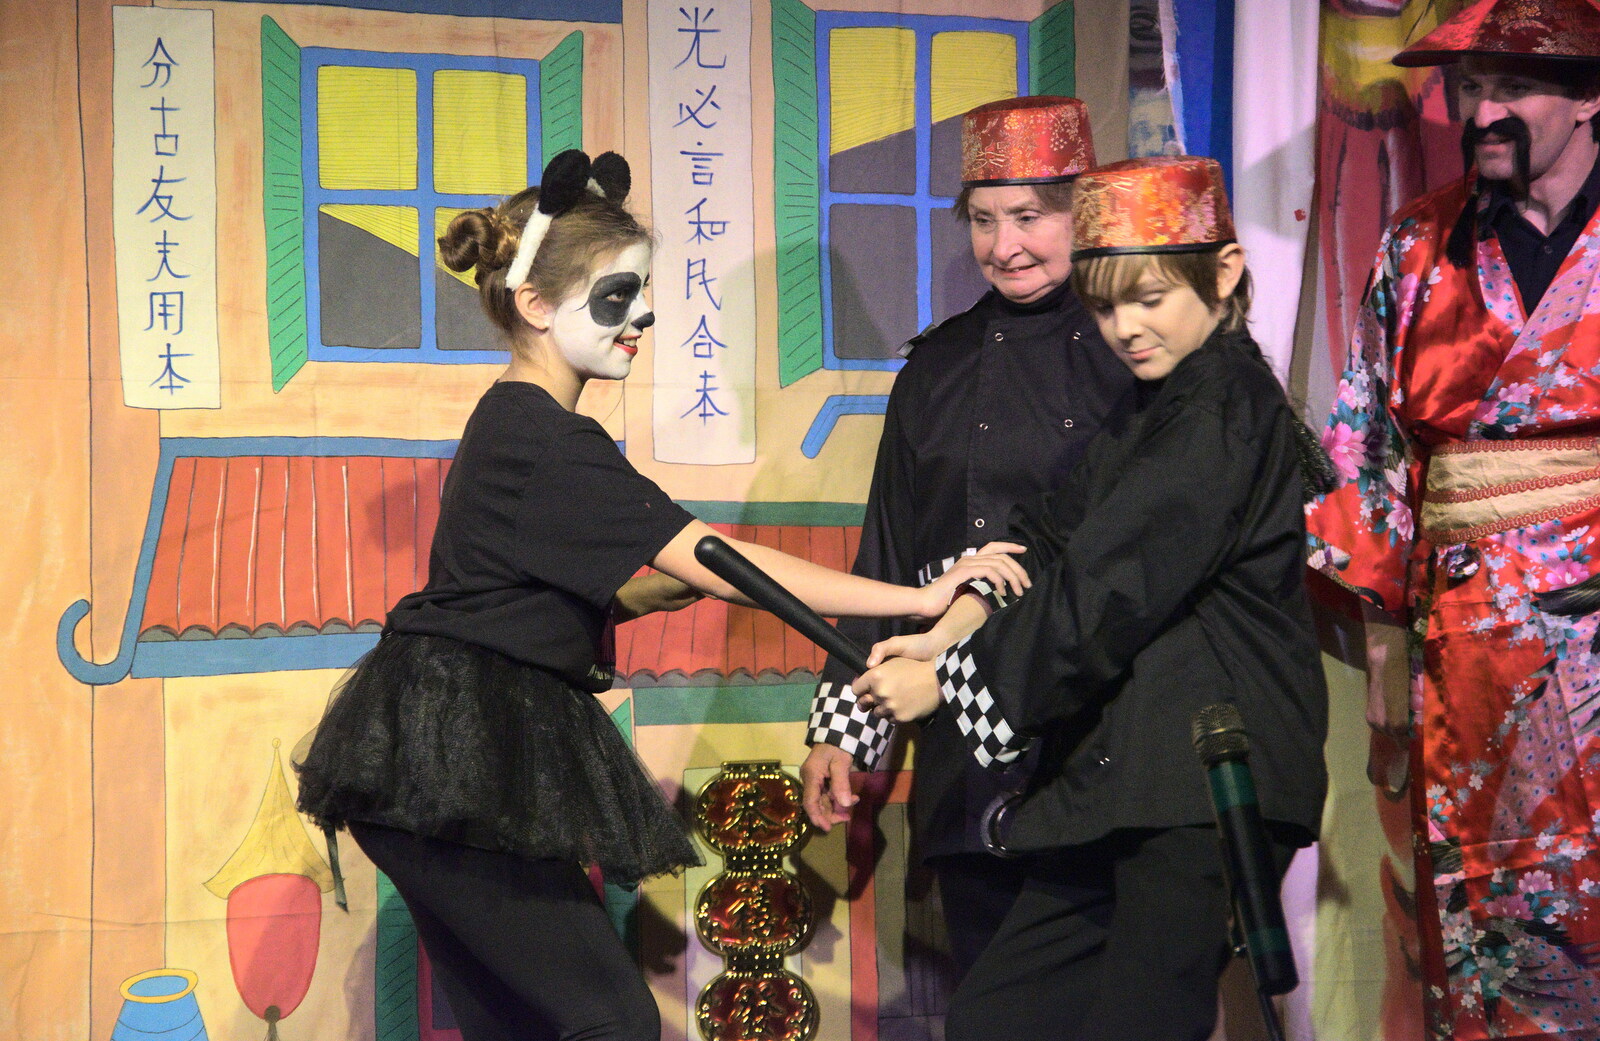 There's a panda on stage from Dove Players do Aladdin, Eye, Suffolk - 10th December 2022